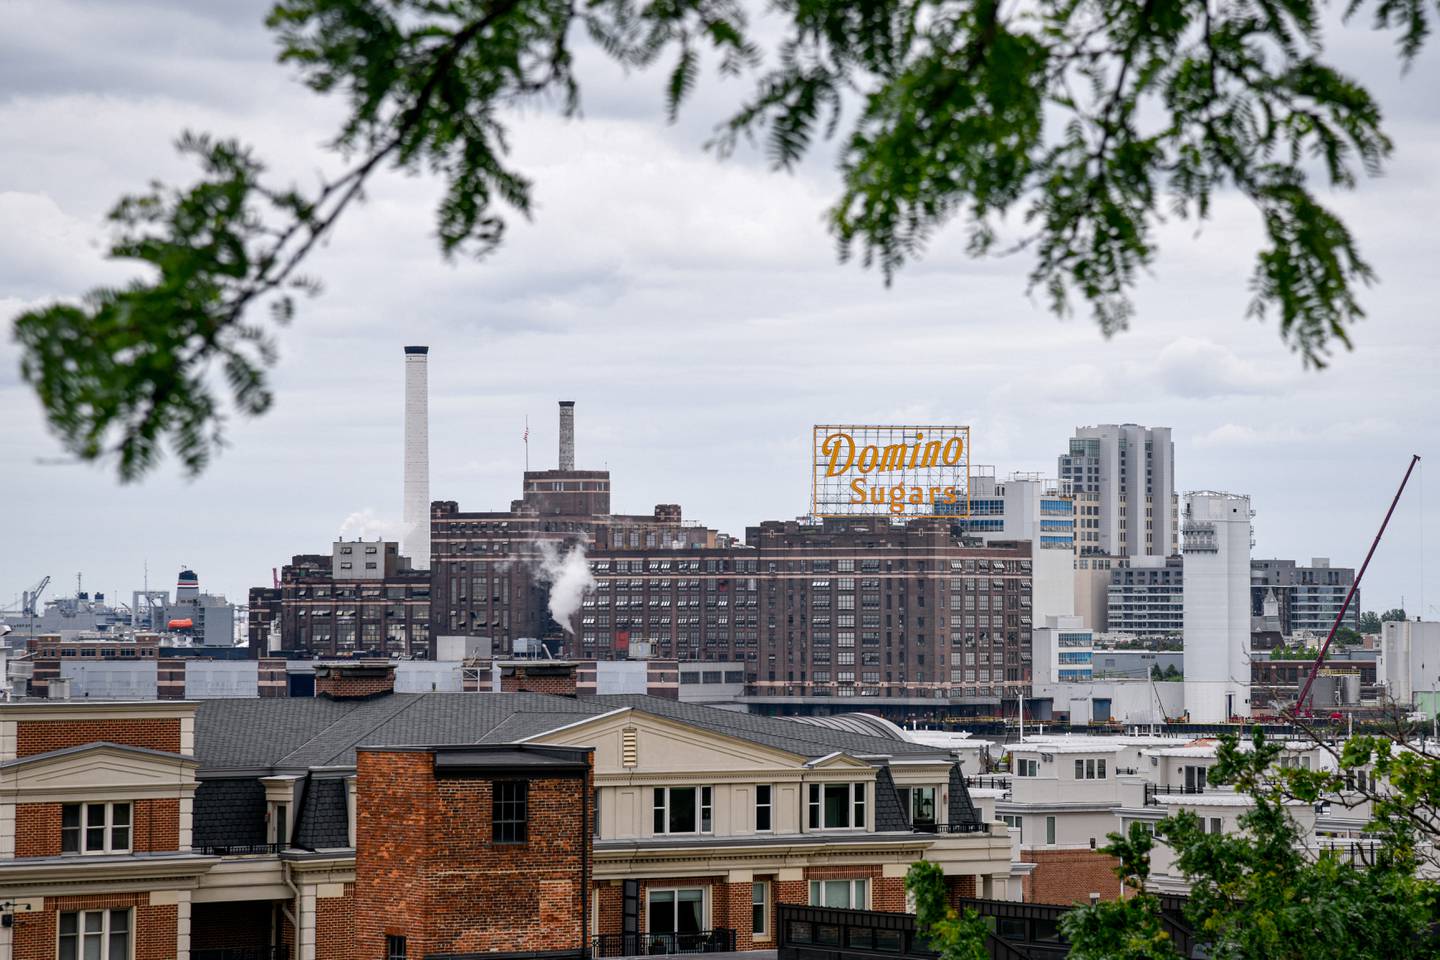 A view of the Domino Sugars sign, as seen from Federal Hill in South Baltimore.